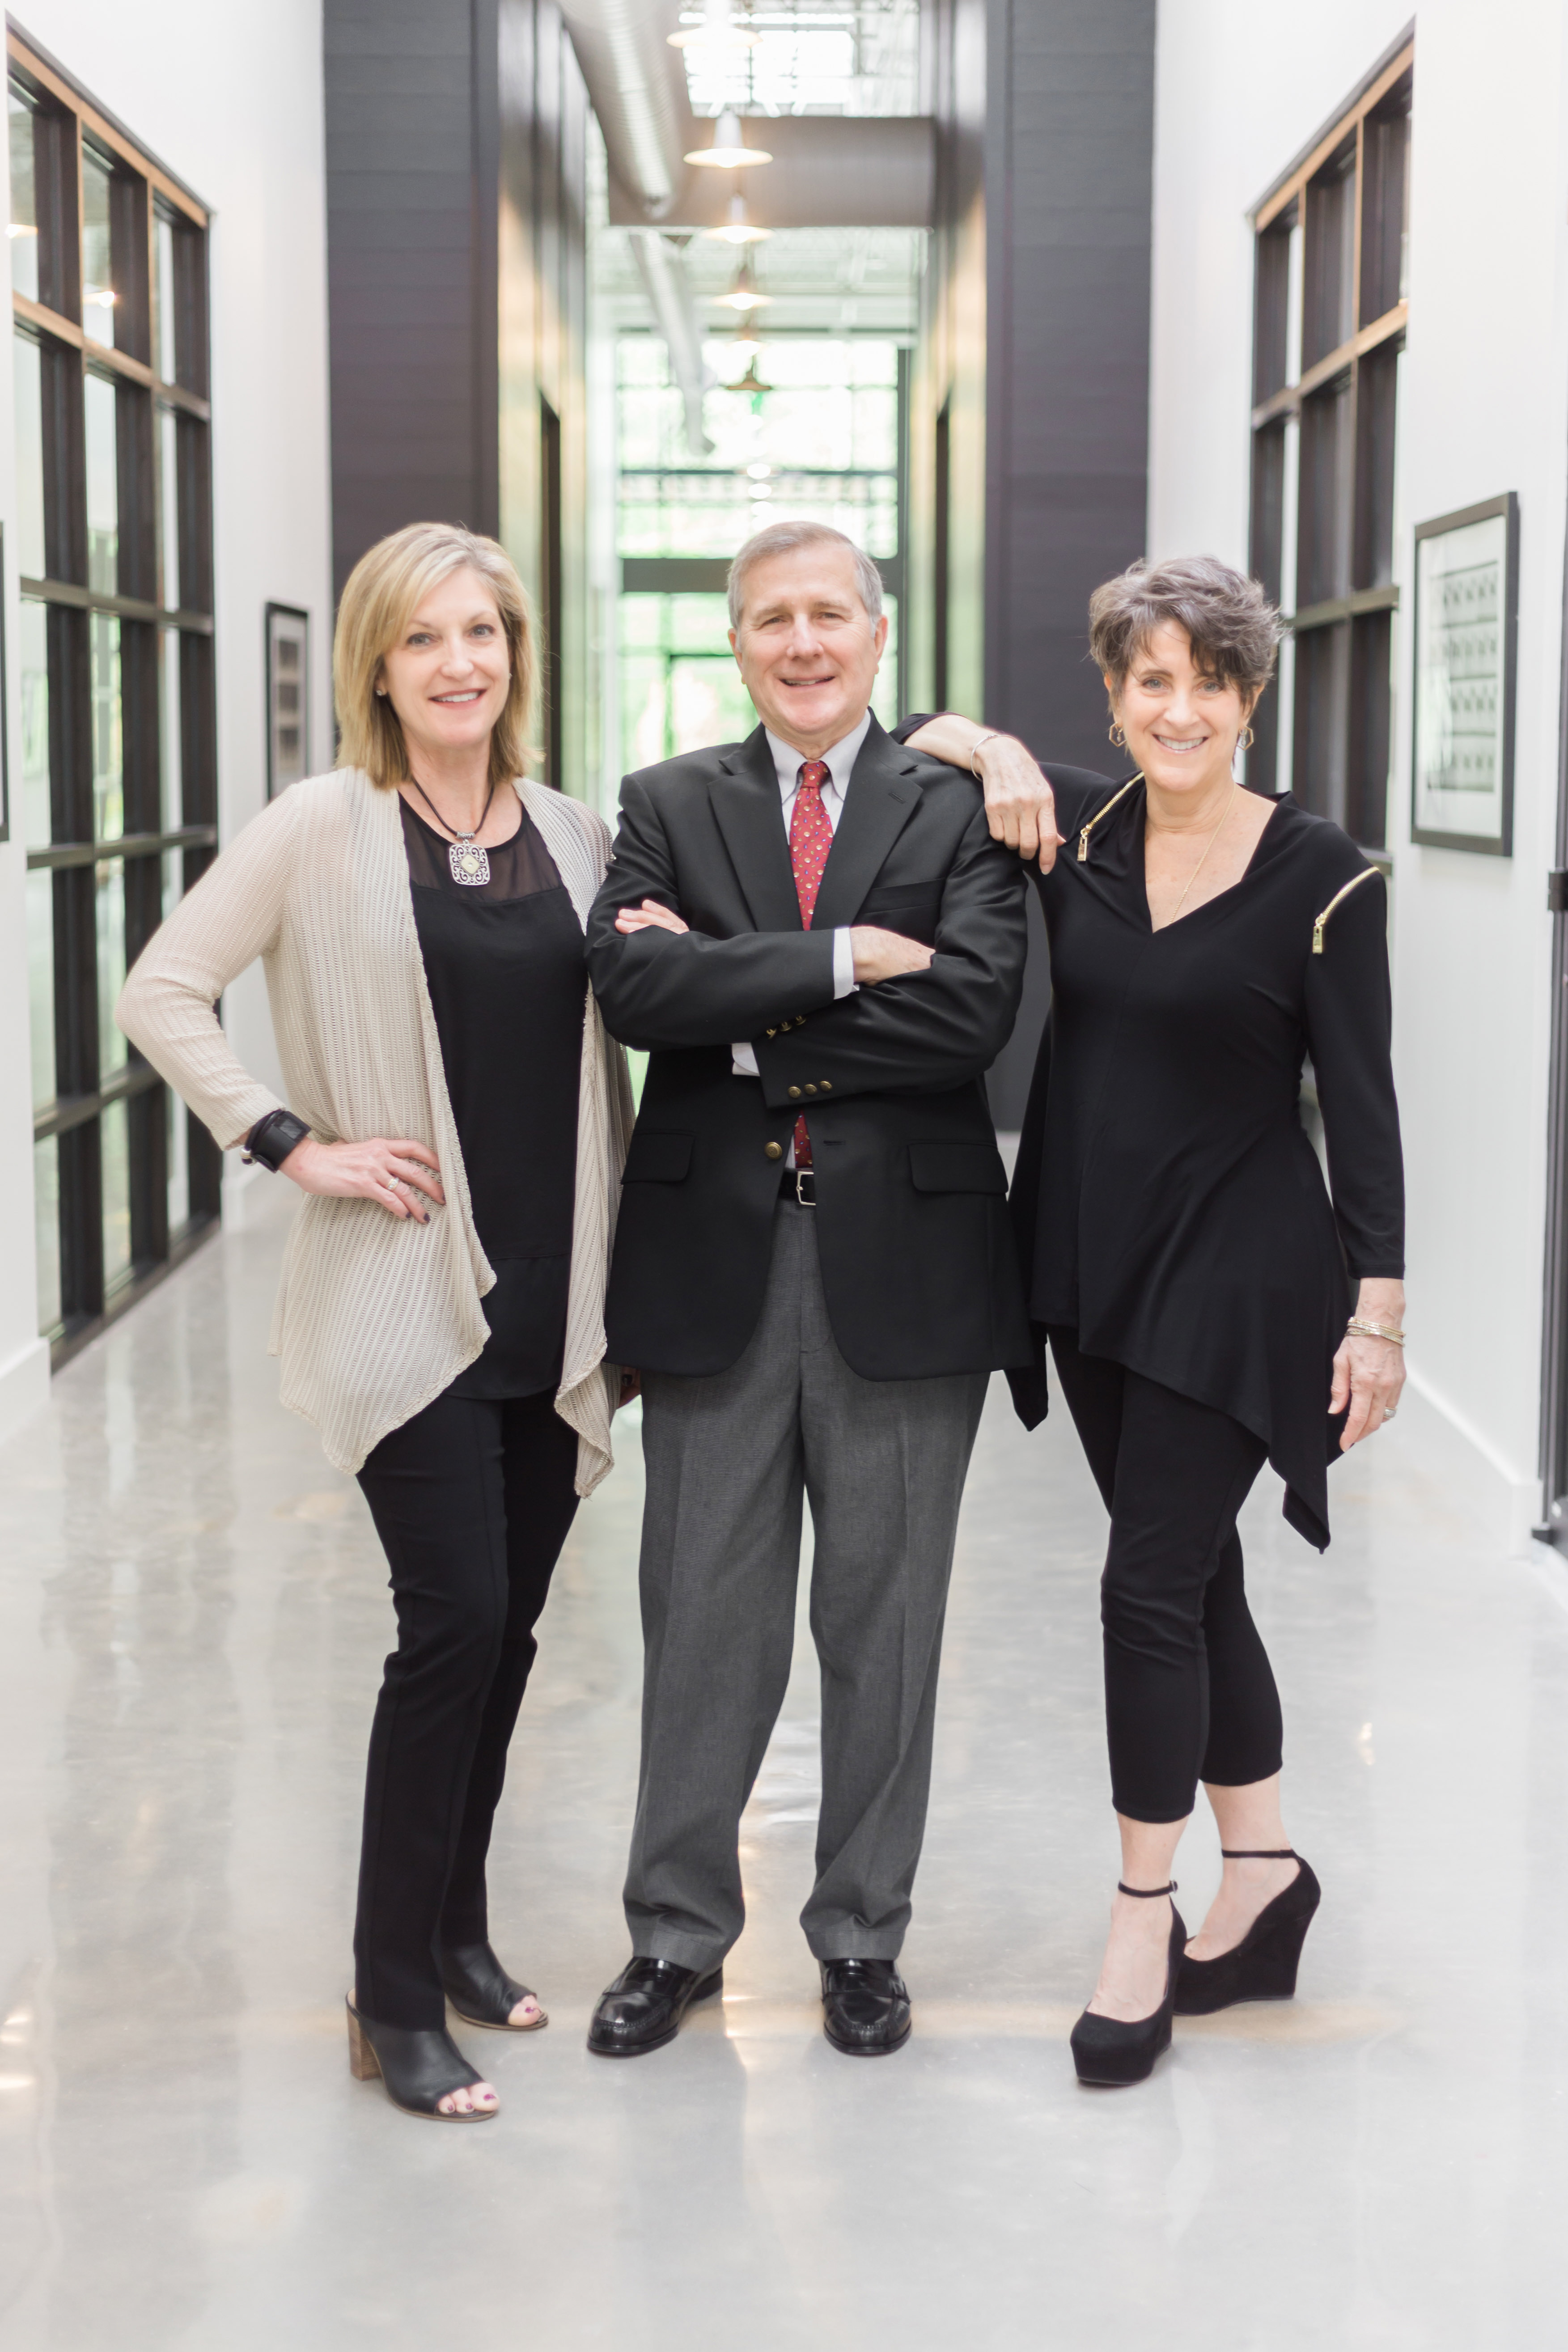 Siblings Stephen Pararo and Cynthia Pararo (right) are joined by sister-in-law Sharon Pararo (left) as the management team for the design/build firm Pineapple House Interior Design, located in Atlanta